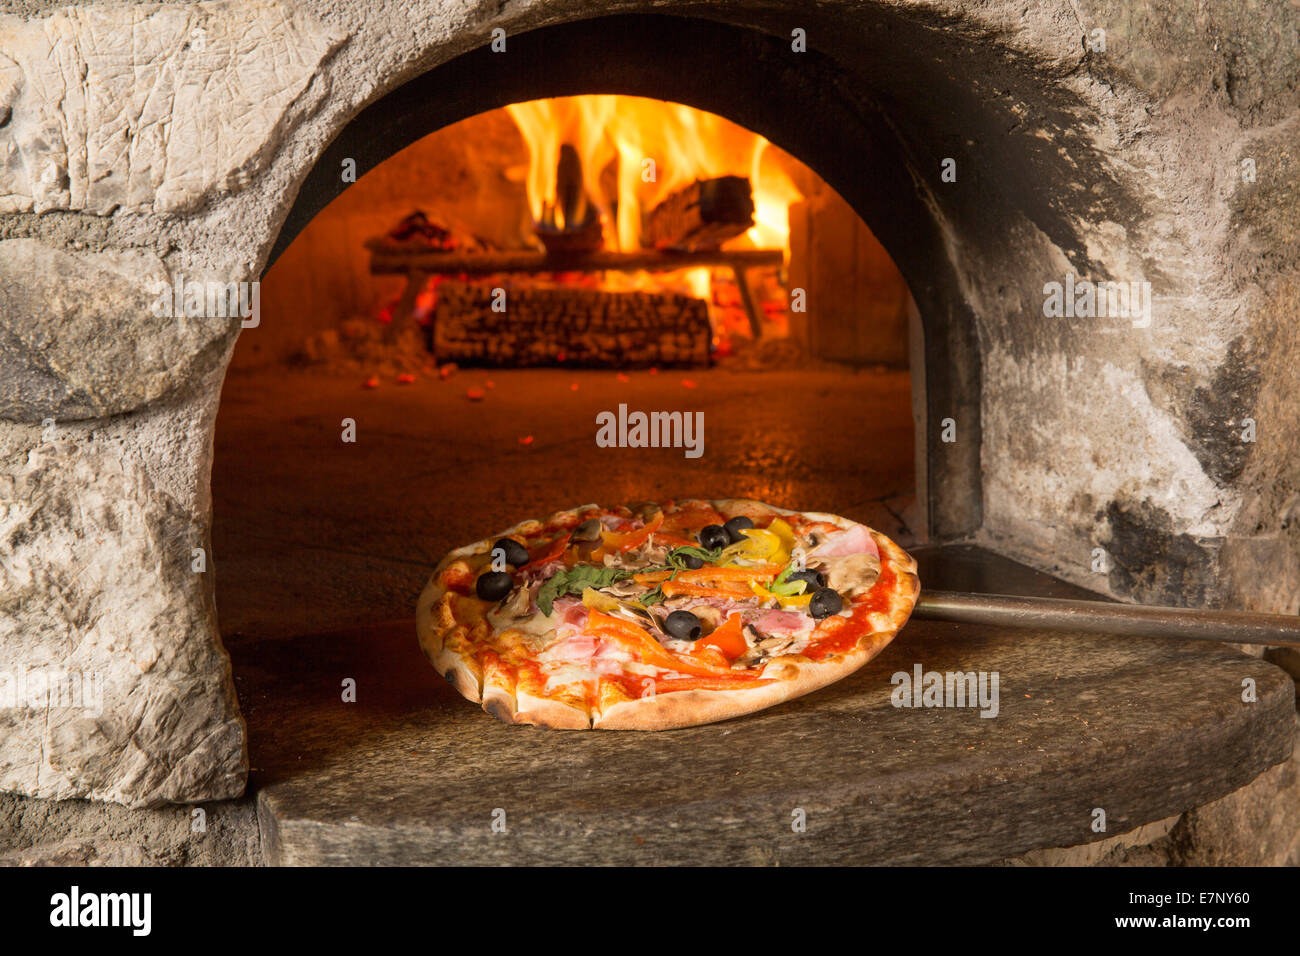 catering, pizza, canton, GR, Graubünden, Grisons, Upper Engadine, food, eating, catering, restaurant, hotel, Switzerland, Europe Stock Photo